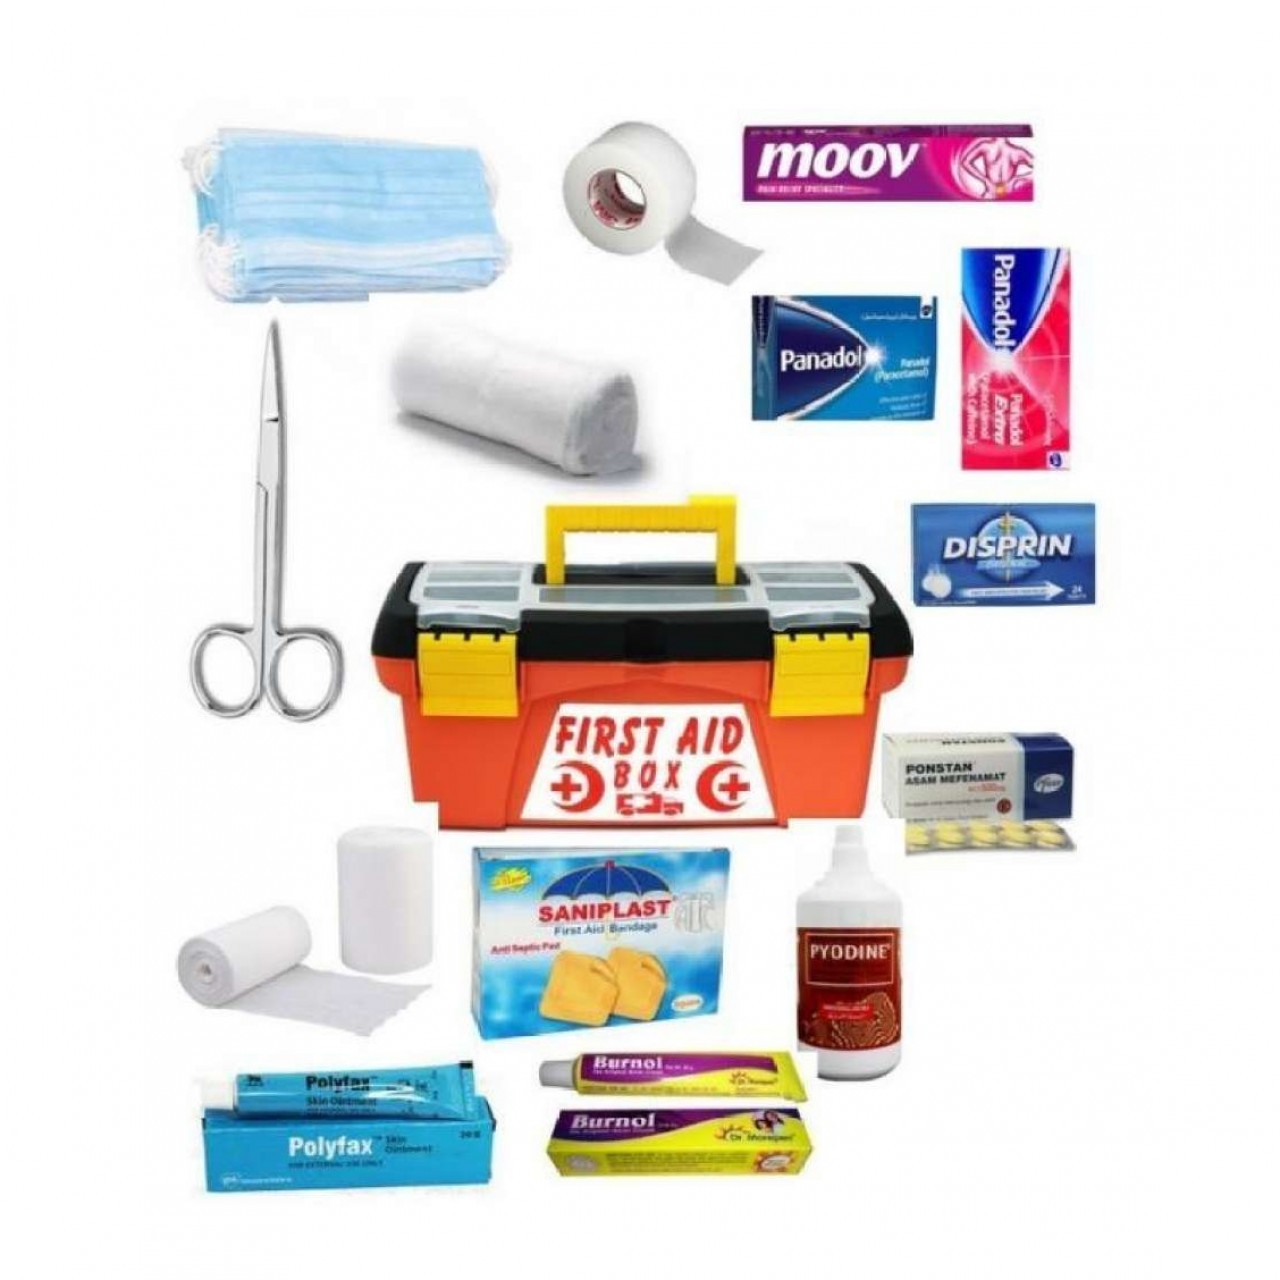 First Aid Box - Large